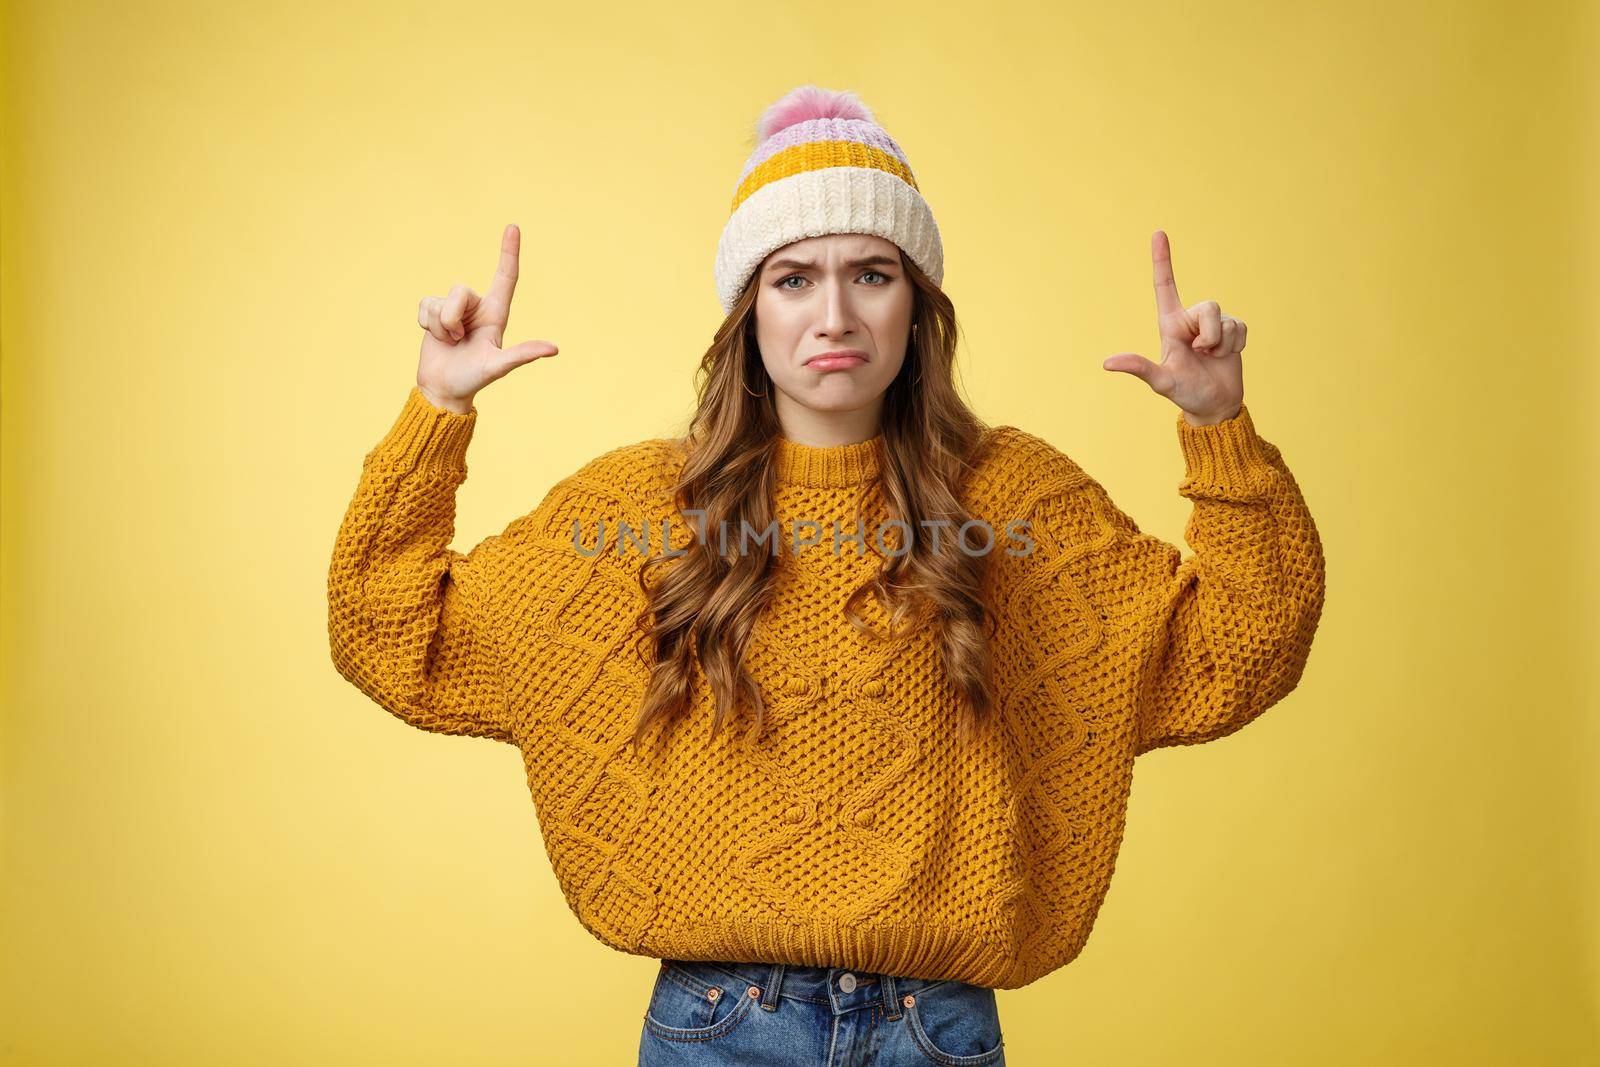 Upset whining complaining displeased cute young immature girl raise hands pointing up crying jealous regret wanna buy cool product have no money, standing sad sobbing yellow background.